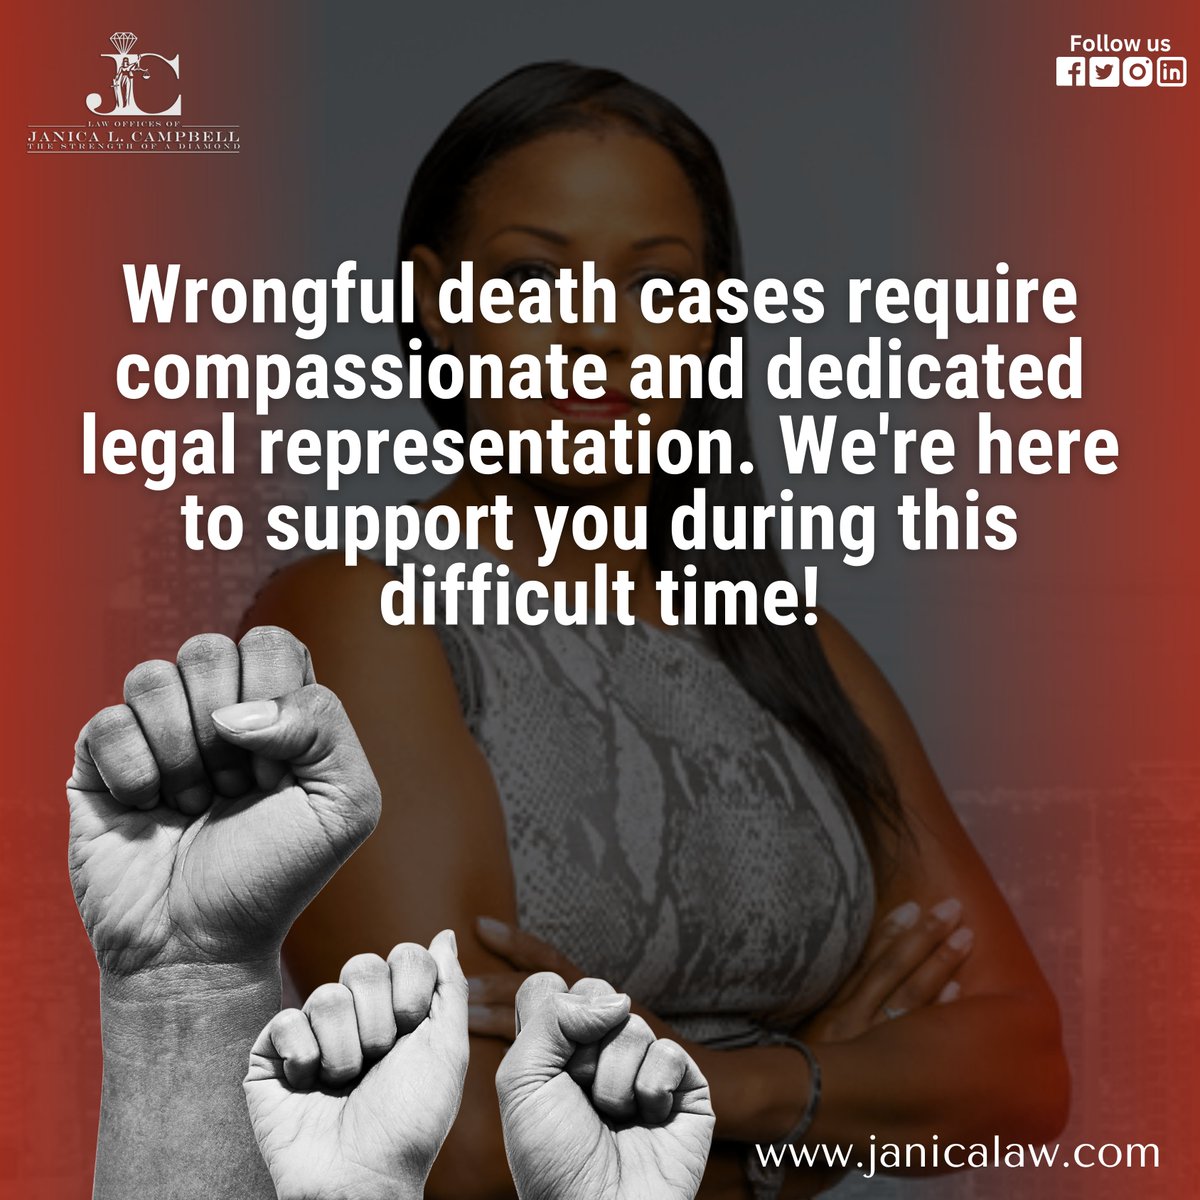 👩‍⚖️ Dealing with the loss of a loved one is never easy. 💔 Our hearts go out to you. Let us provide the compassionate and dedicated legal representation you deserve during this challenging time. 

#WrongfulDeath #LegalSupport #CompassionInLaw #DedicatedRepresentation #LegalAdvice